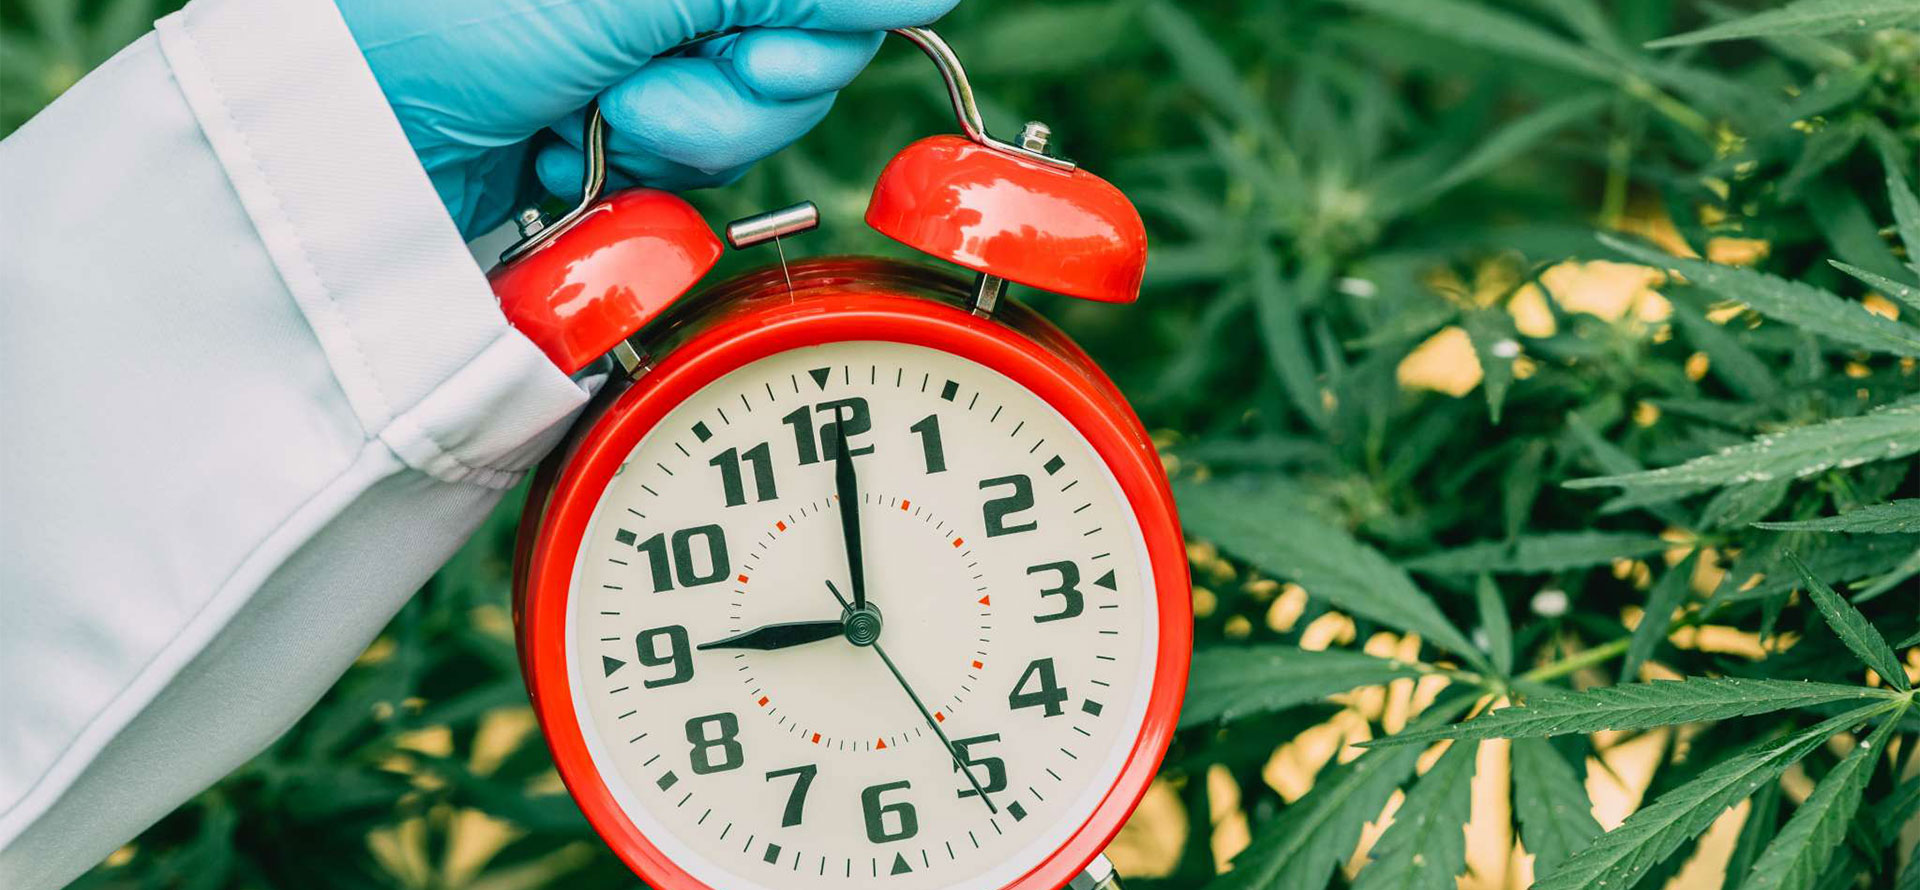 How long does cbd stay in your system.